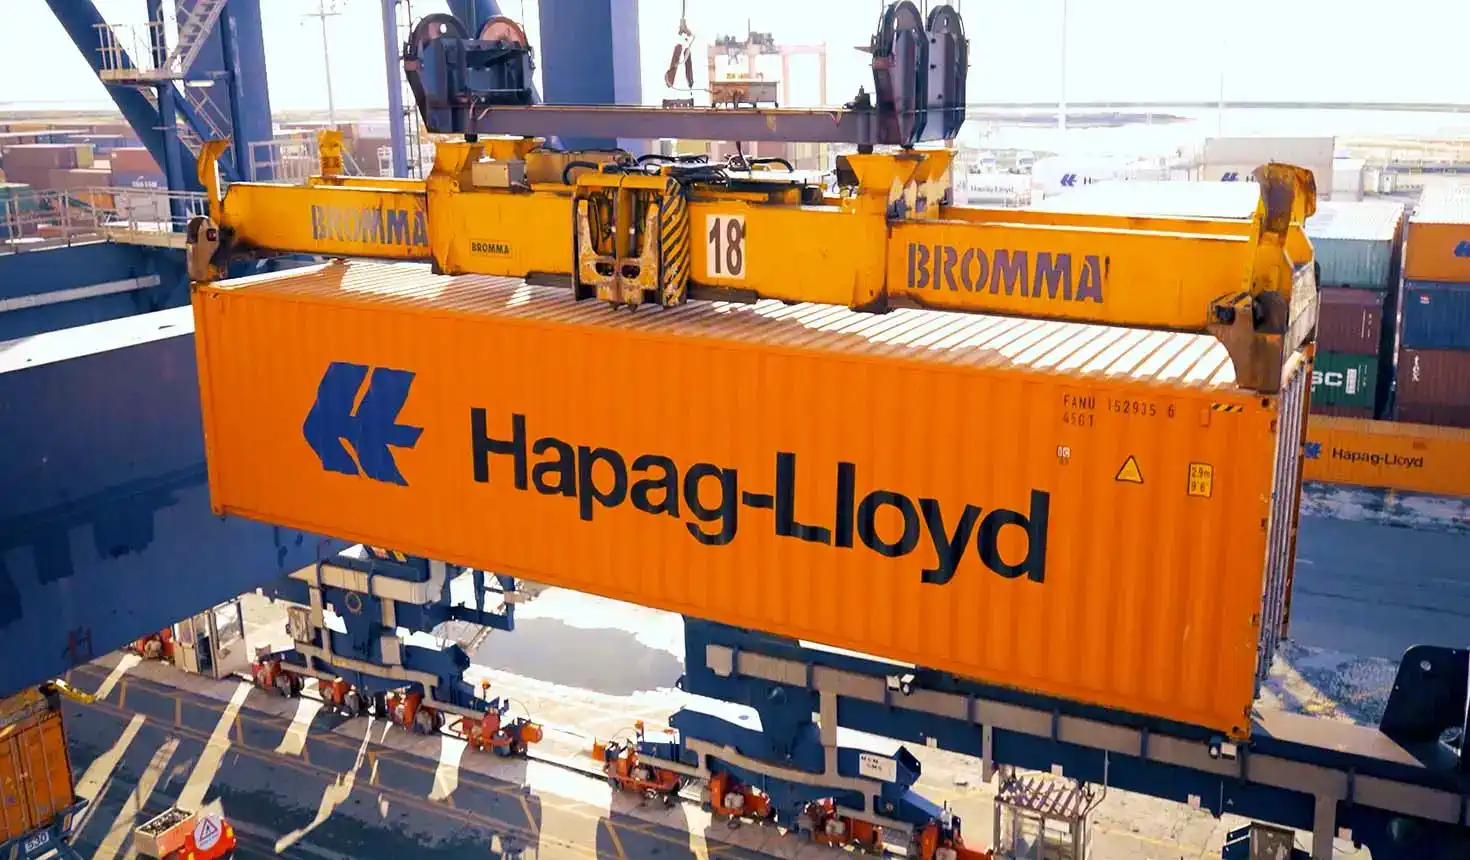 Hapag-Lioyd container